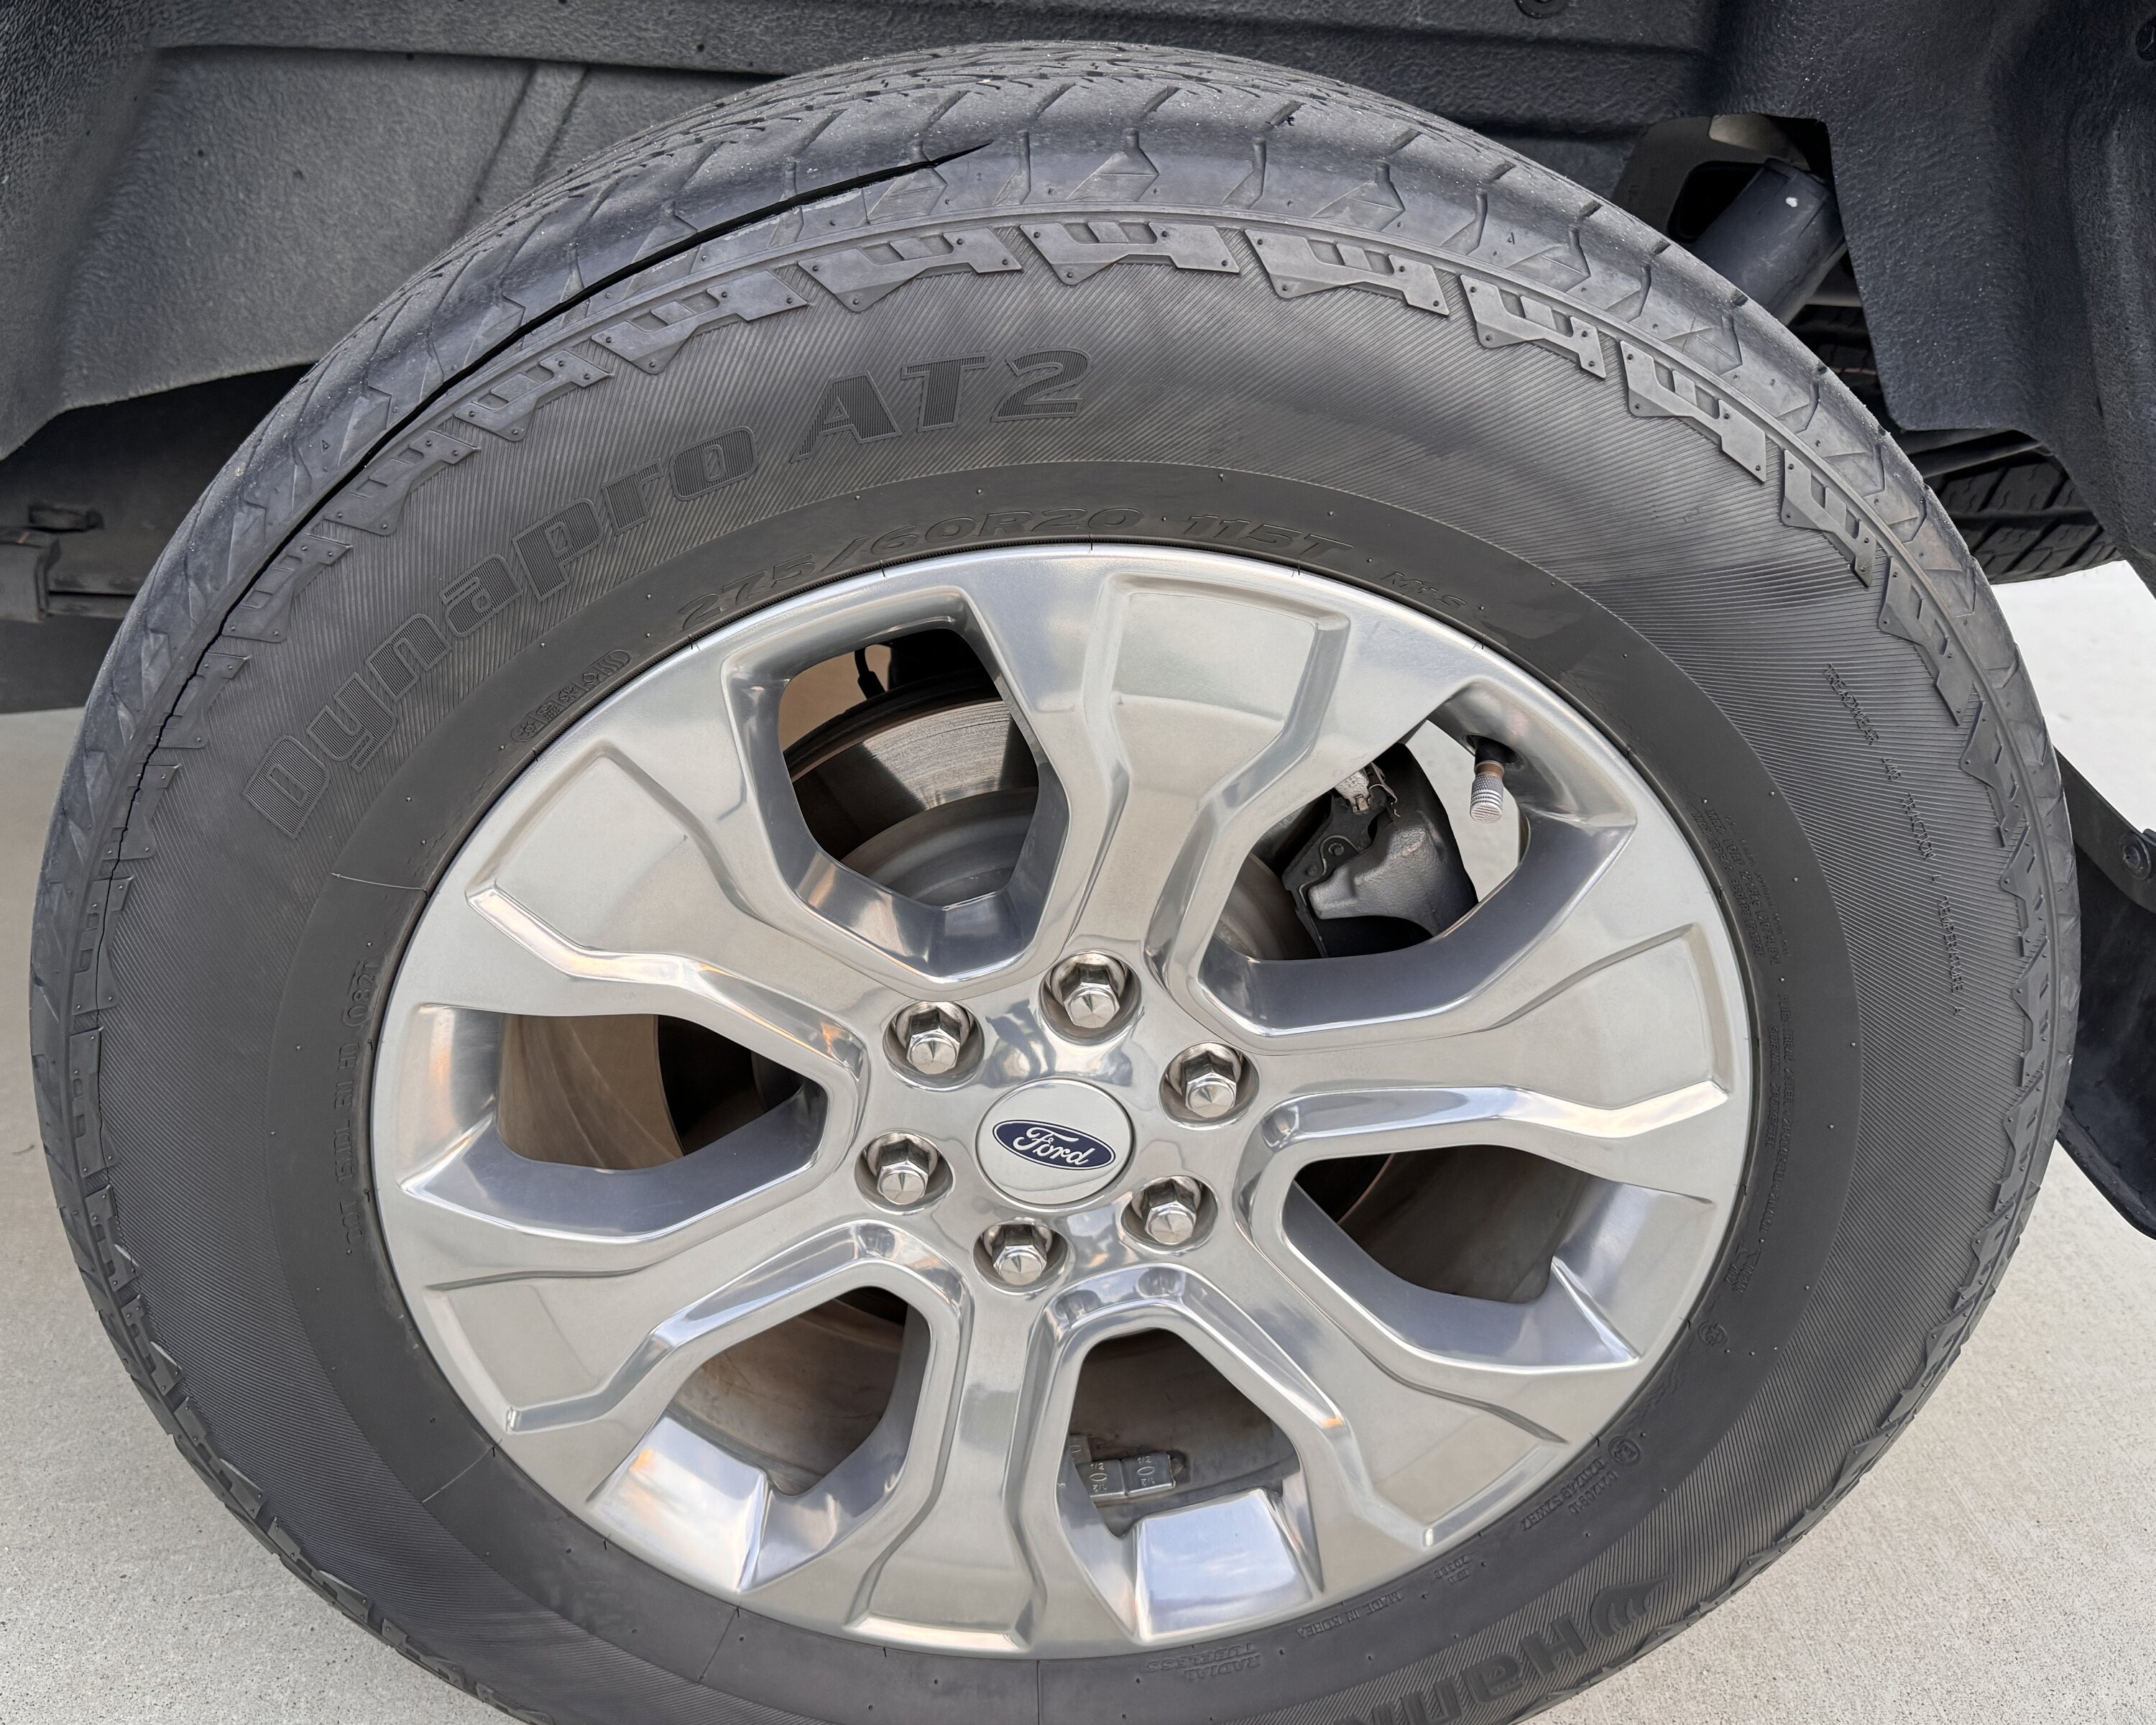 Ford F-150 Tire cut or delaminating? IMG_7929